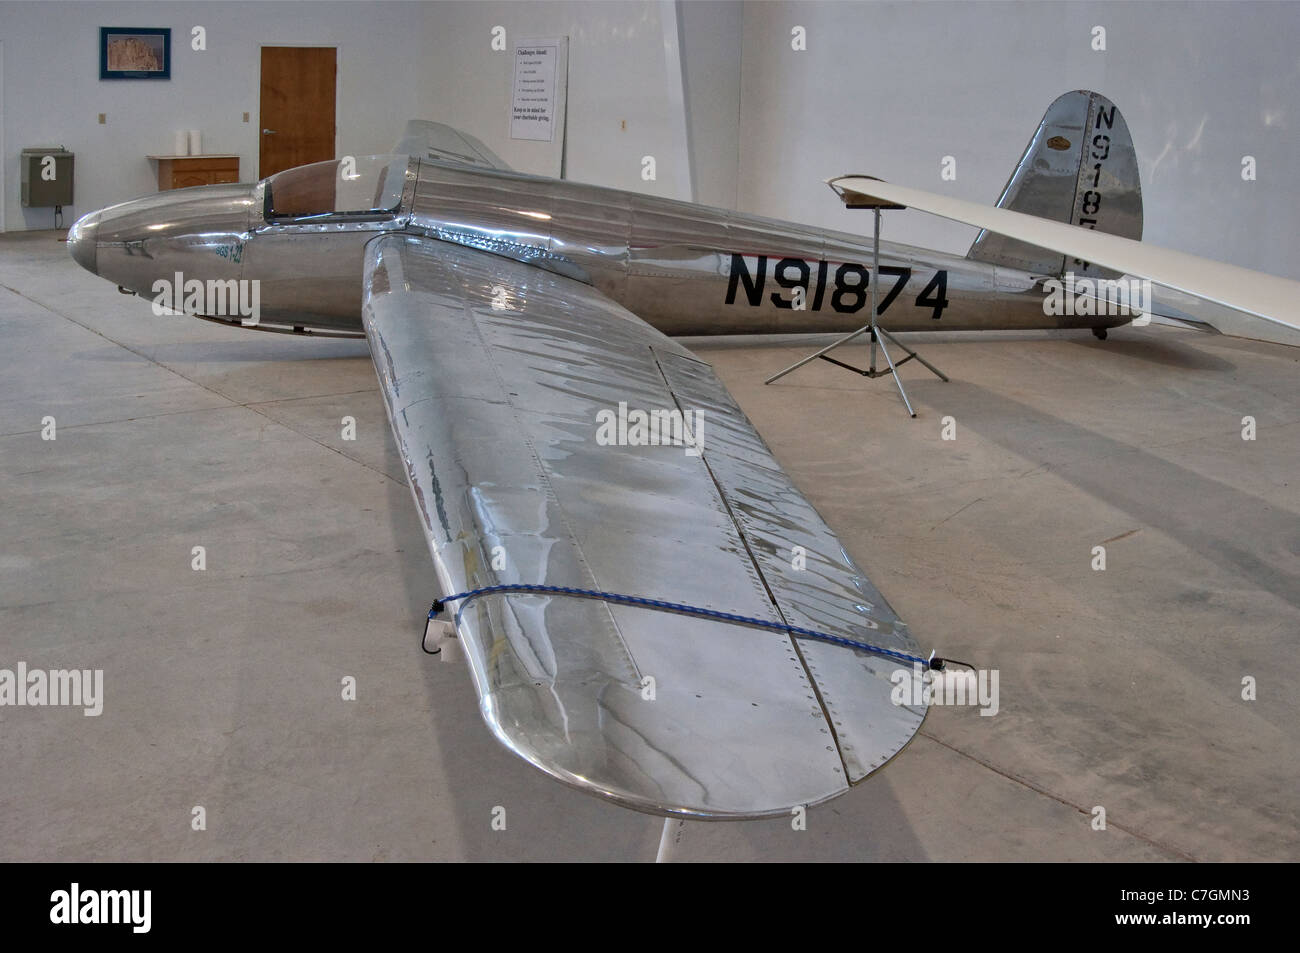 Schweizer Sgs 1 23 Usa 1948 Design Glider At Southwest Soaring Museum In Moriarty New Mexico Usa Stock Photo Alamy